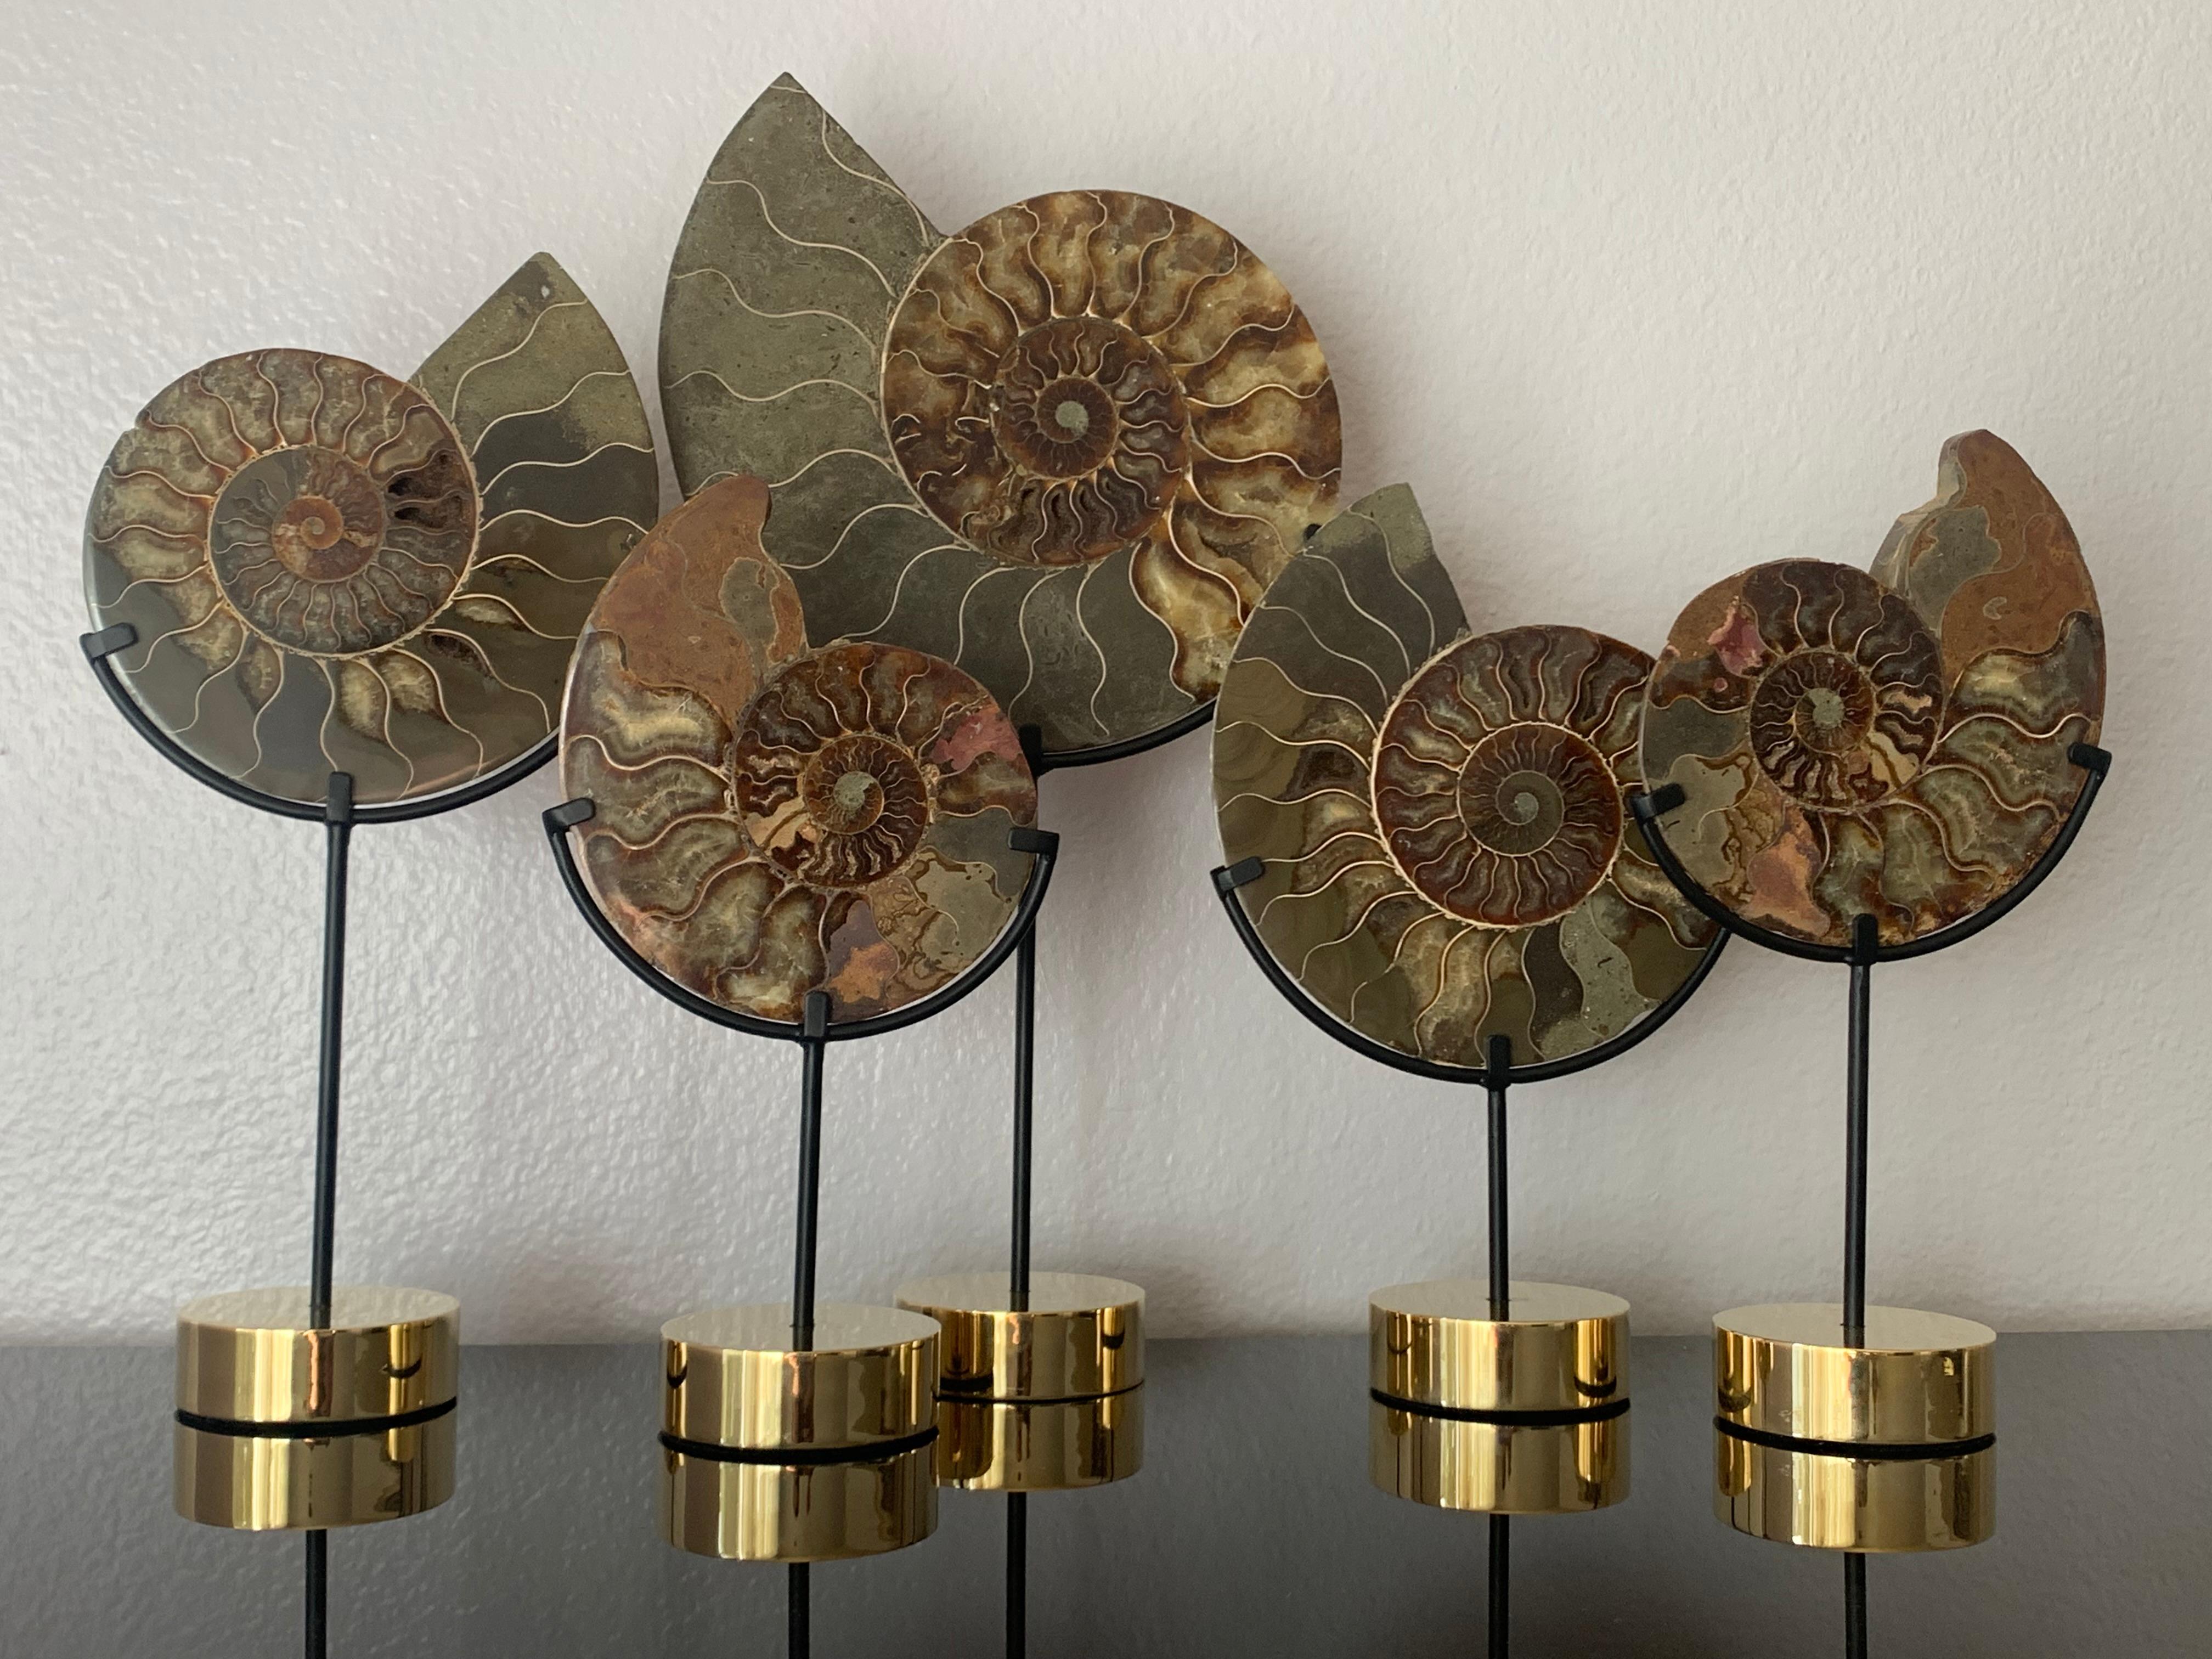 Set of five ammonite fossils on brass base
Large is 15.5